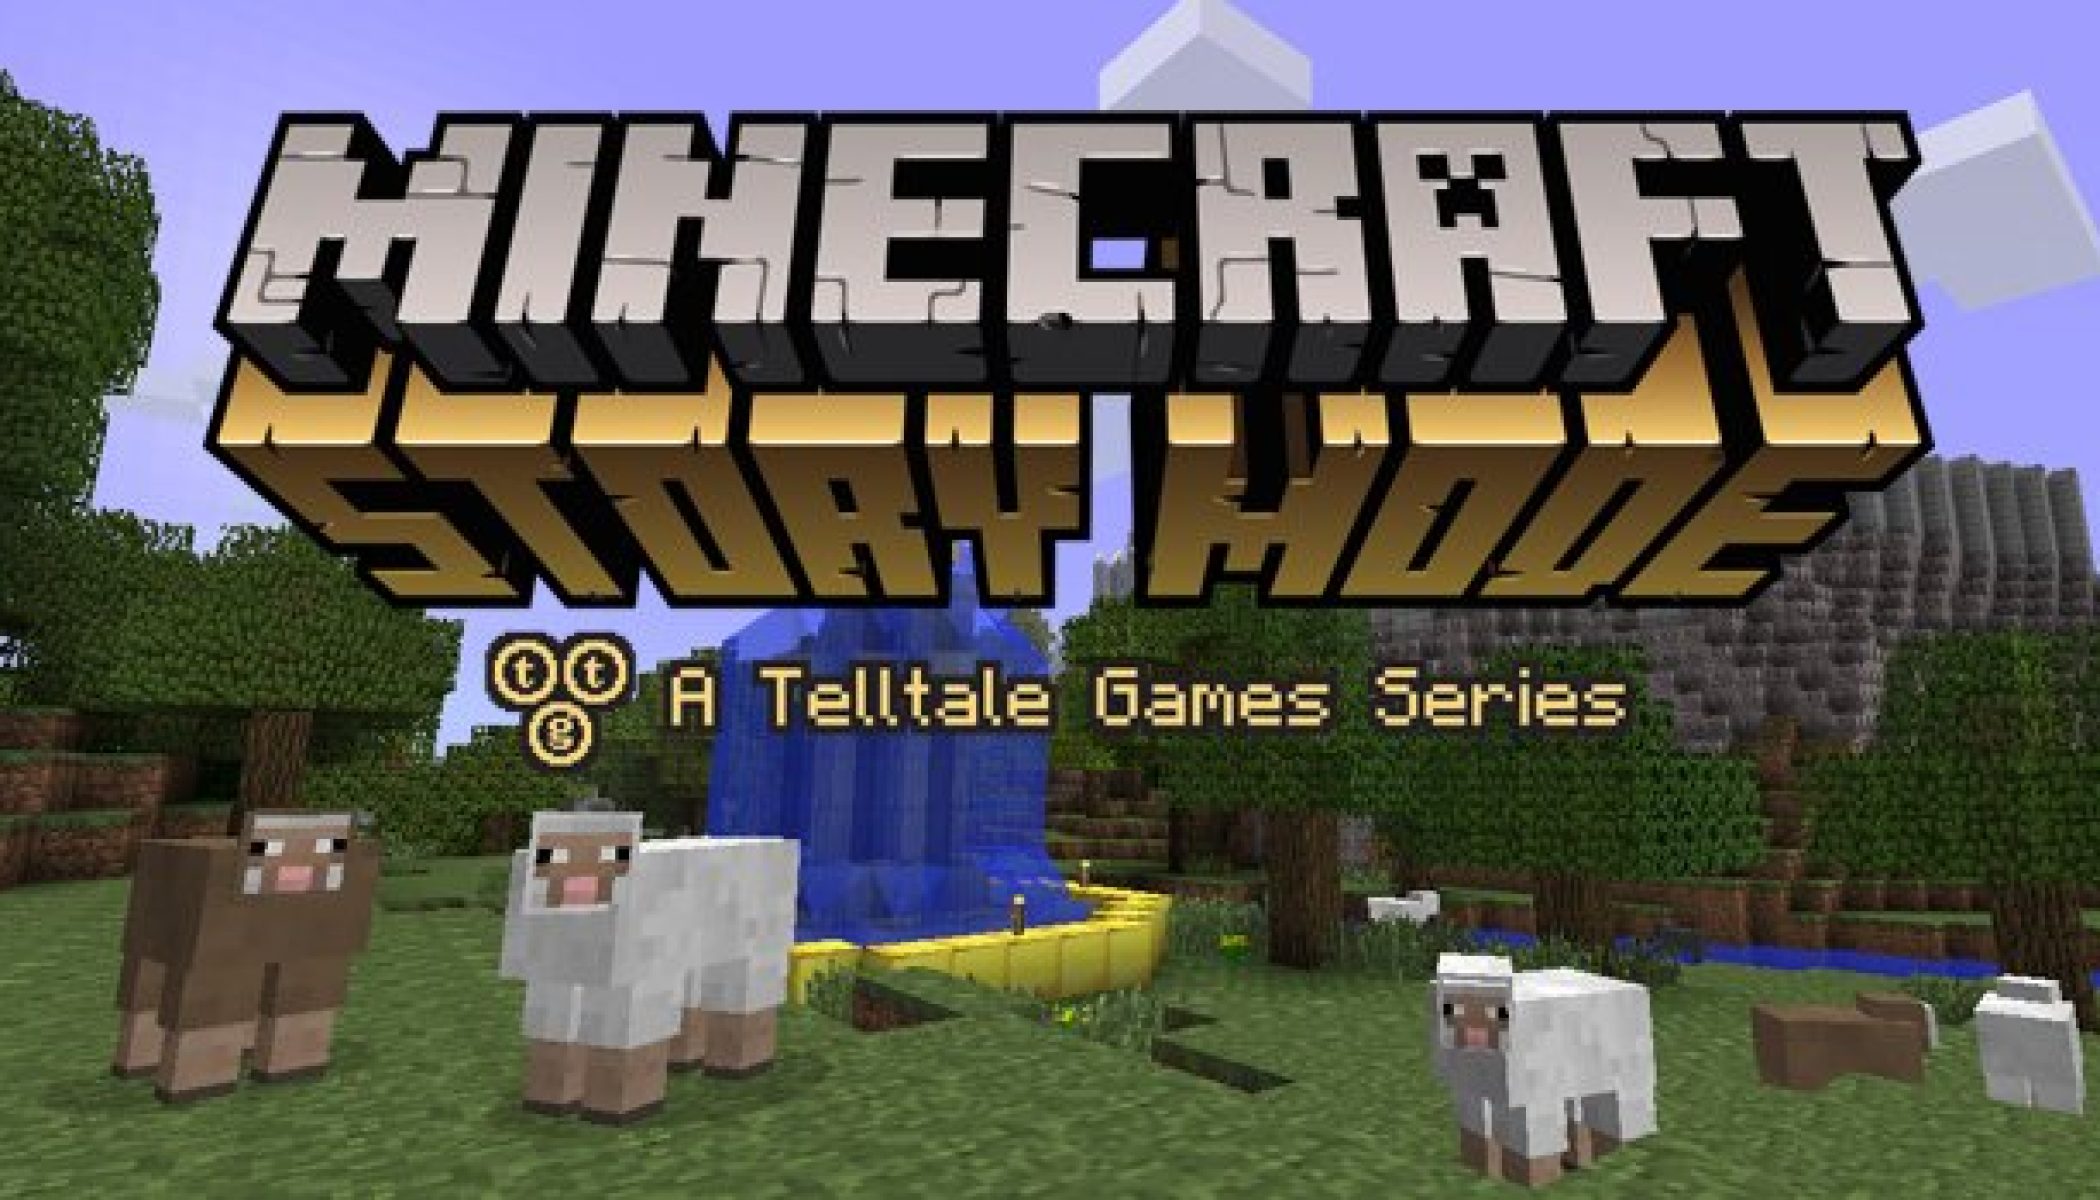 Telltale Releases a Bunch of New 'Minecraft: Story Mode' Screens –  TouchArcade